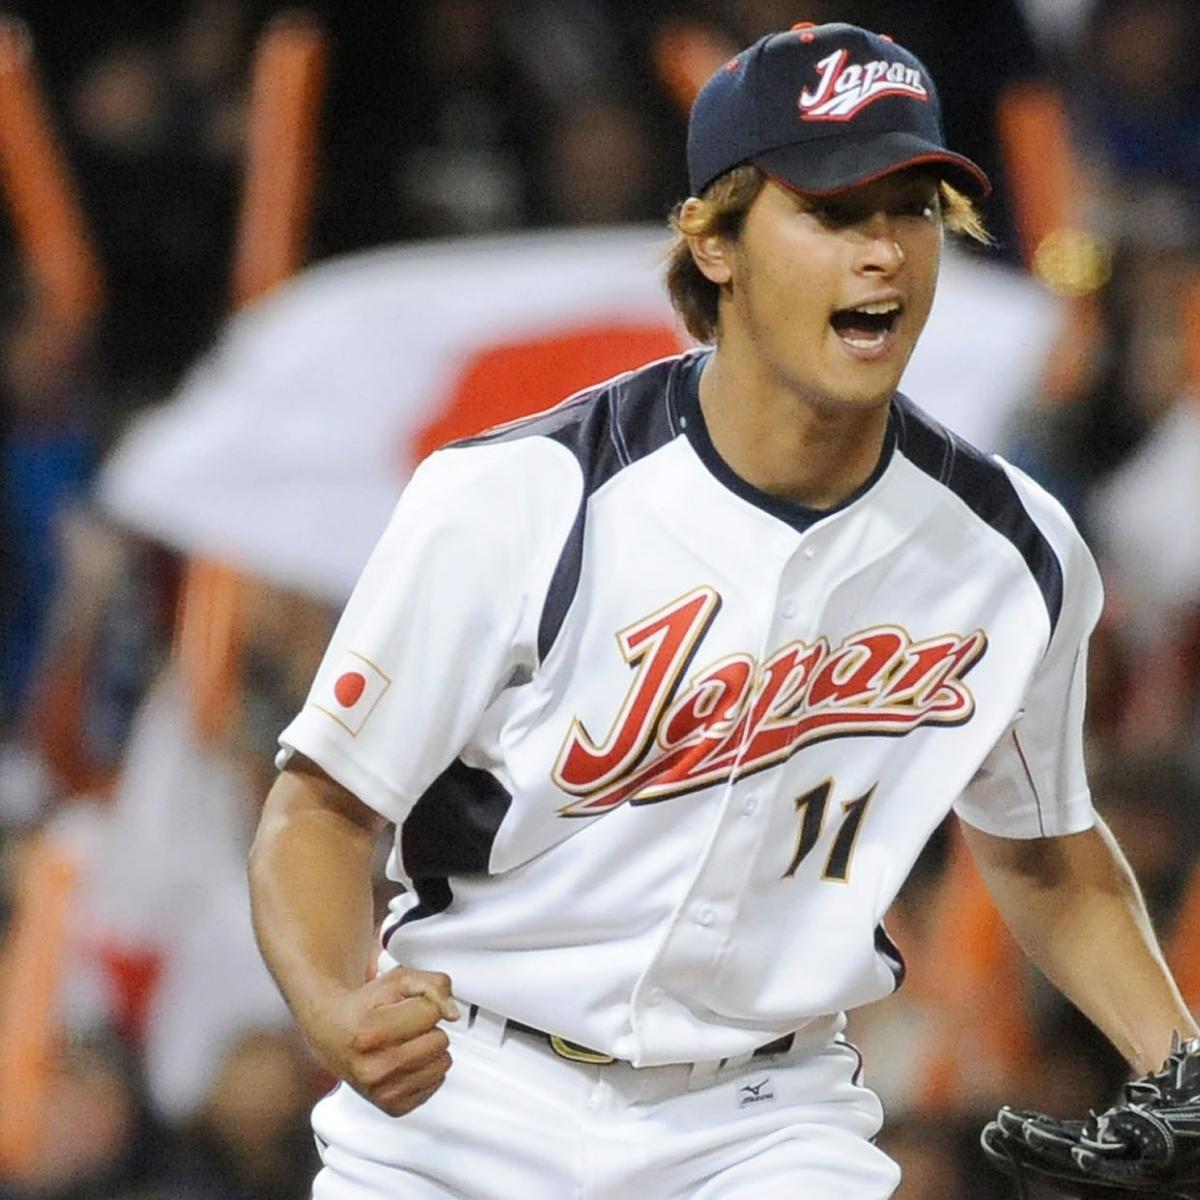 7 International Prospects to Pay Attention to at the World Baseball